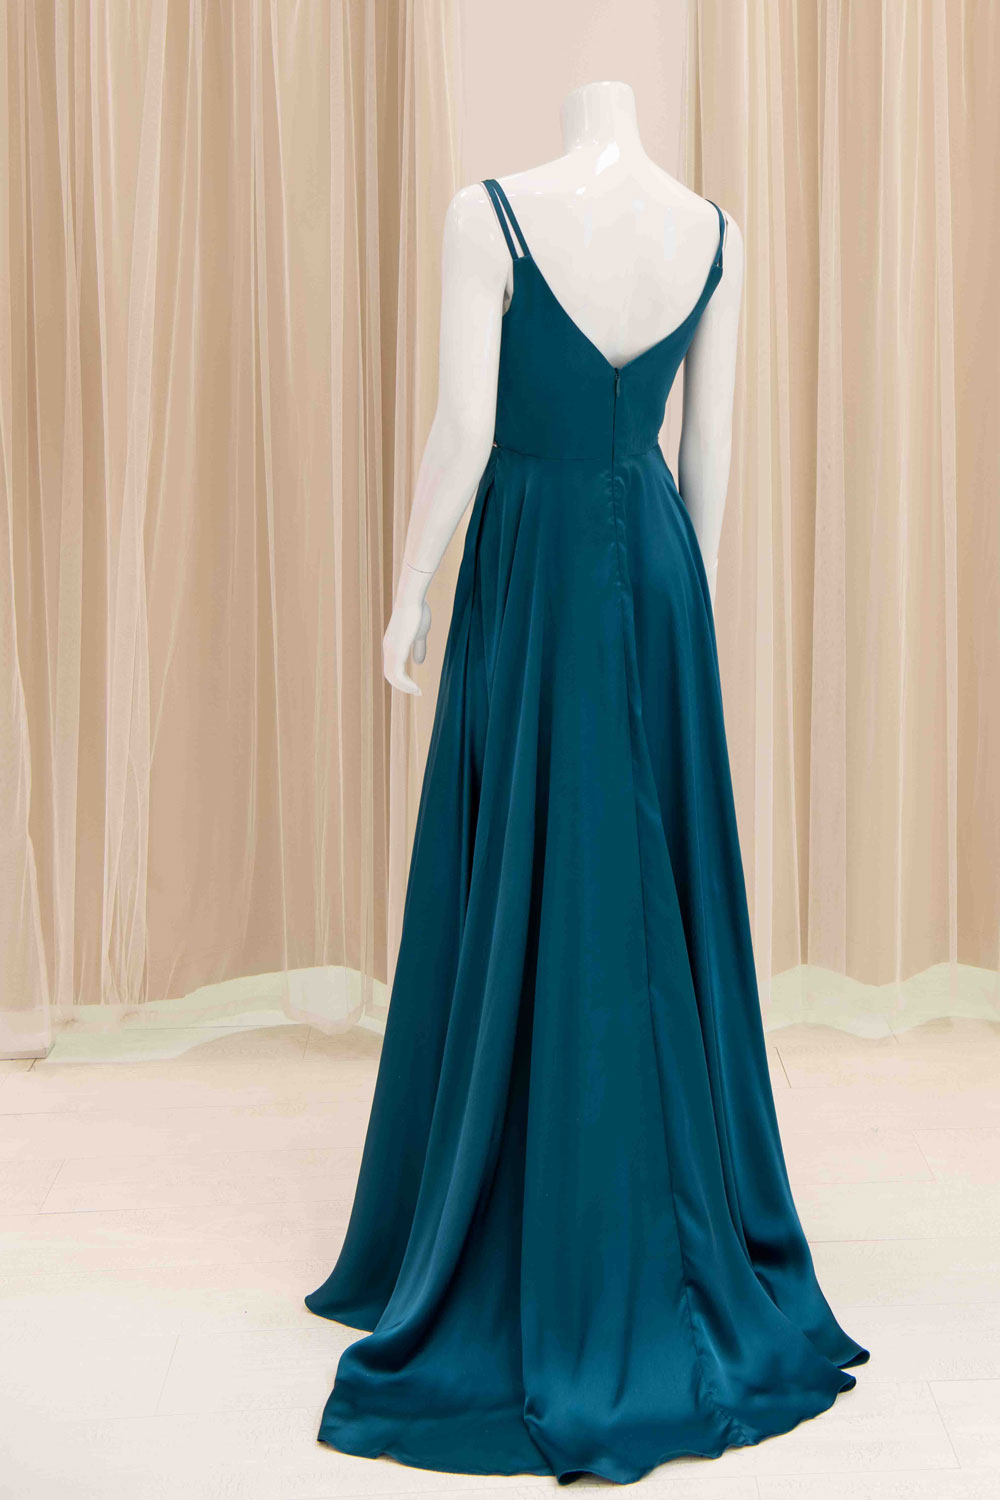 Wedding Guest Dress in Teal